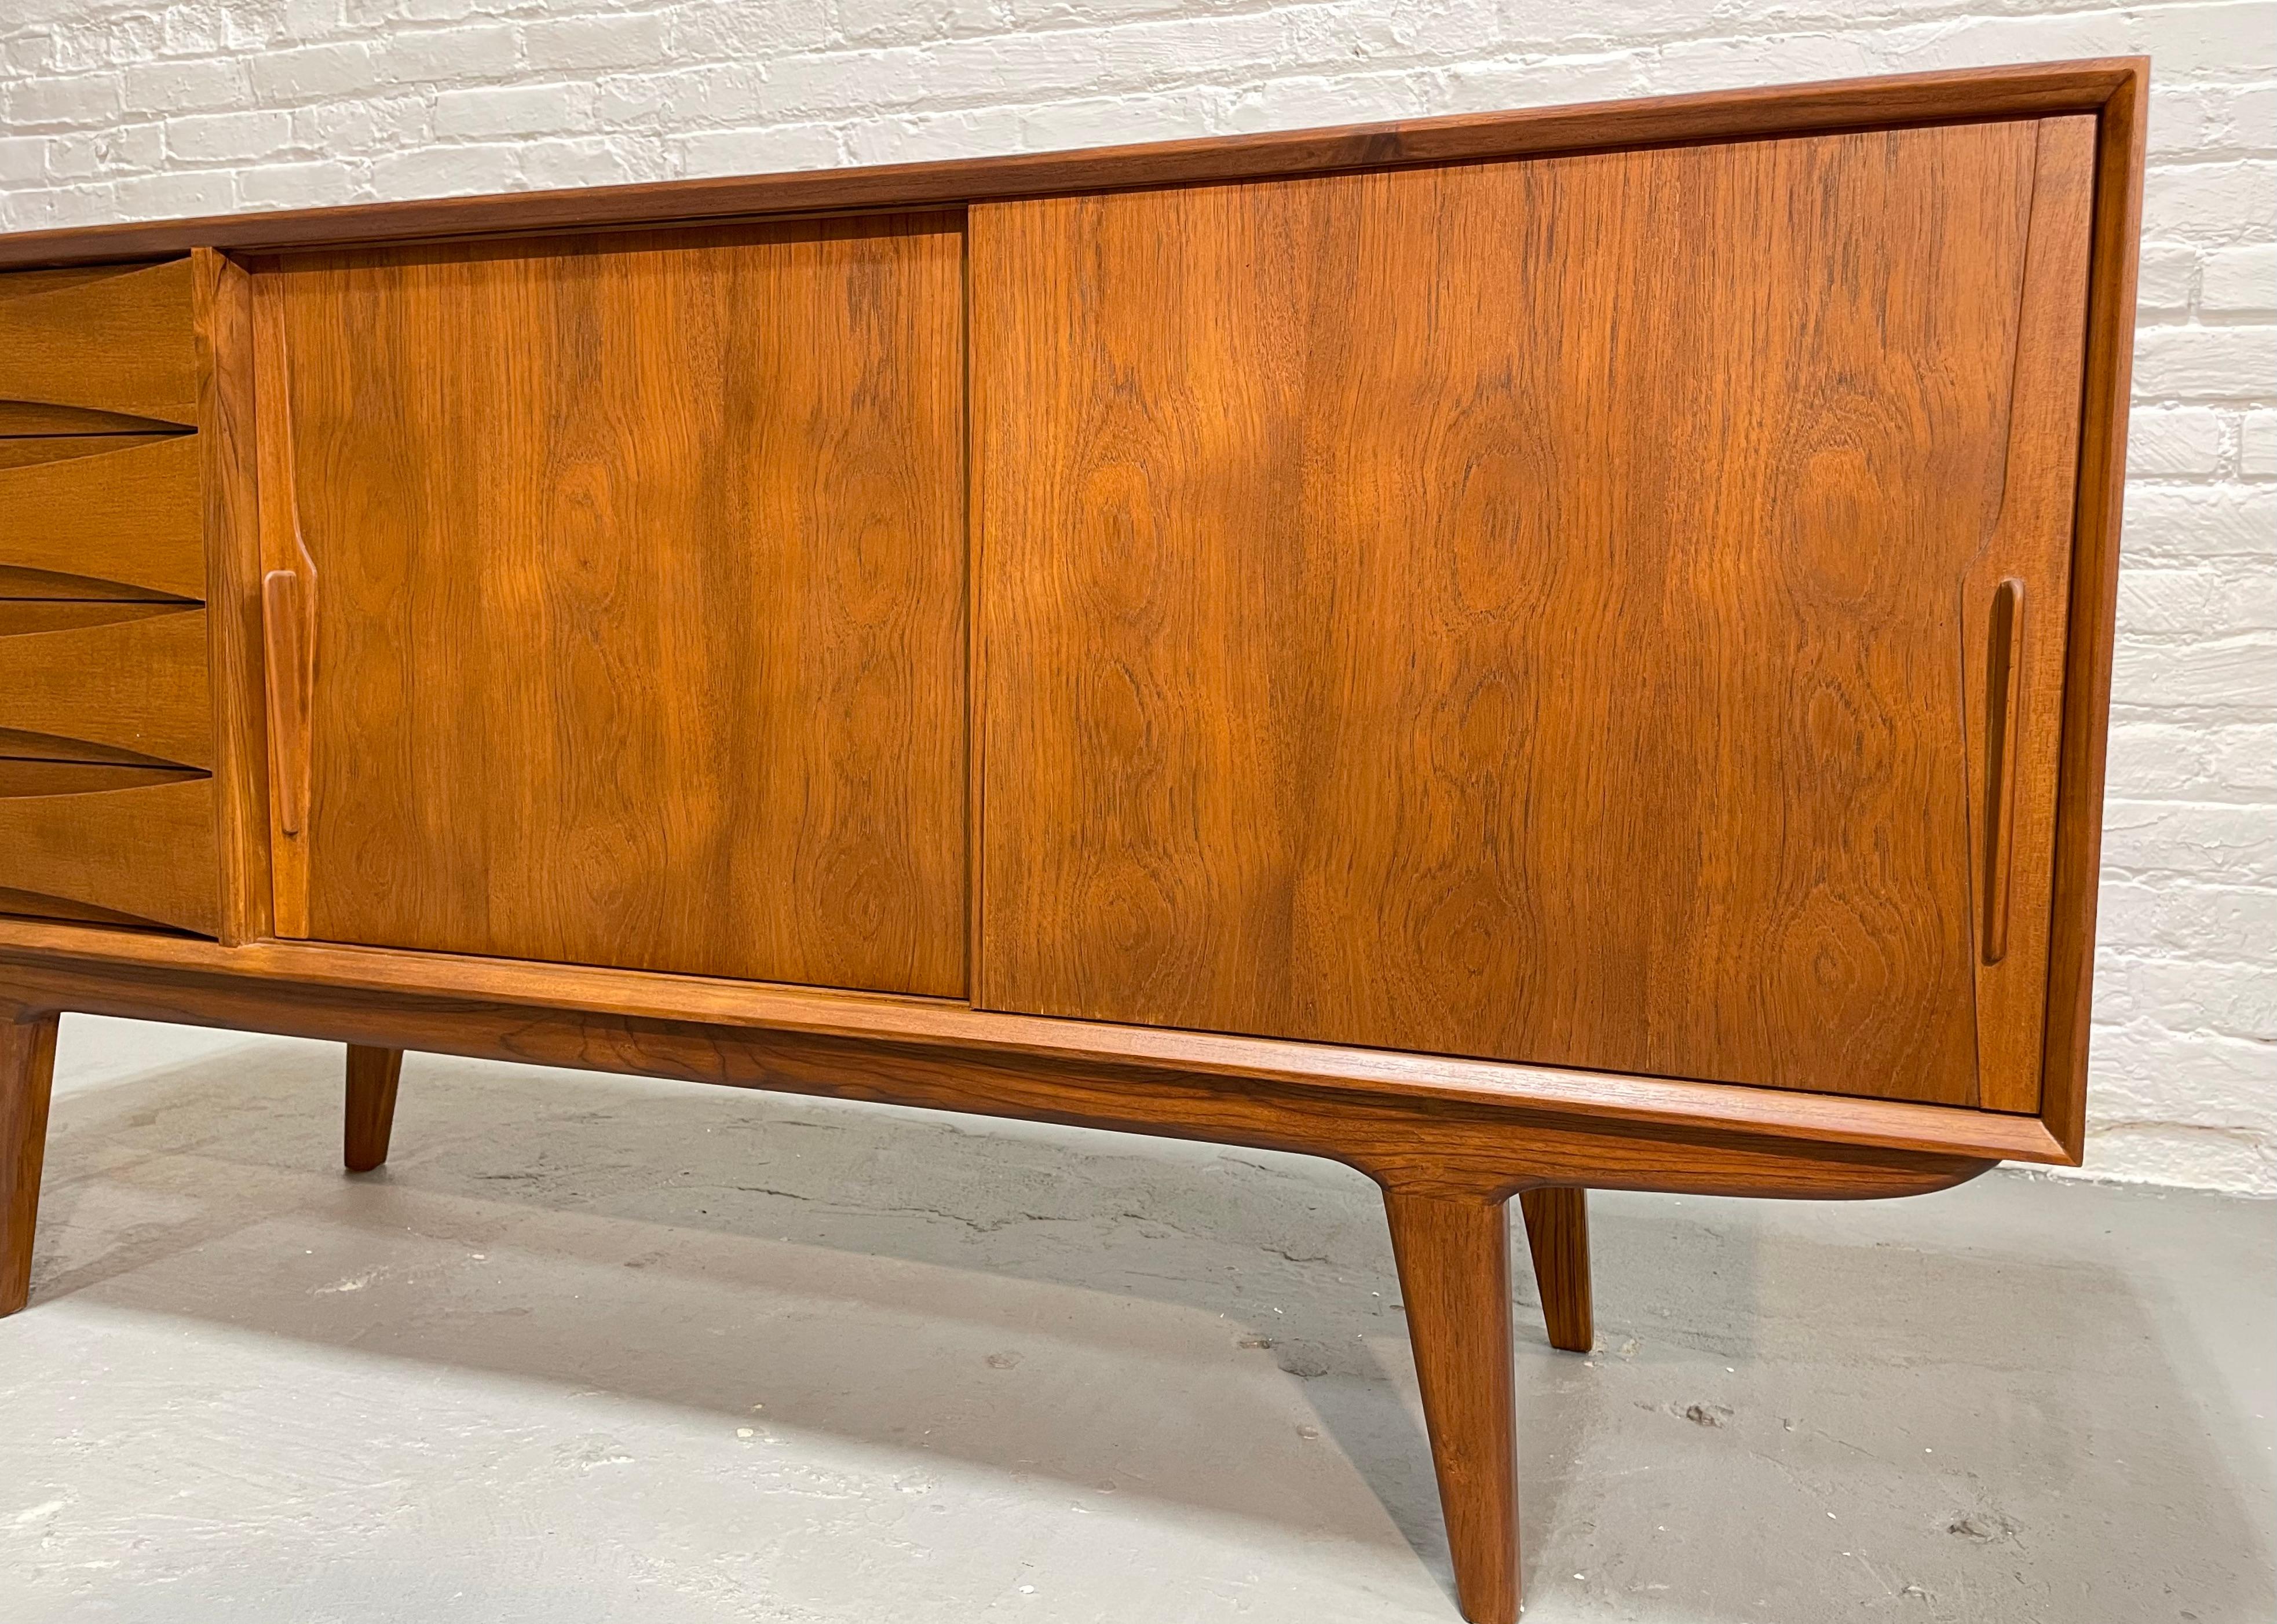 Contemporary  Handsome Mid Century MODERN styled SIDEBOARD / CREDENZA media stand For Sale